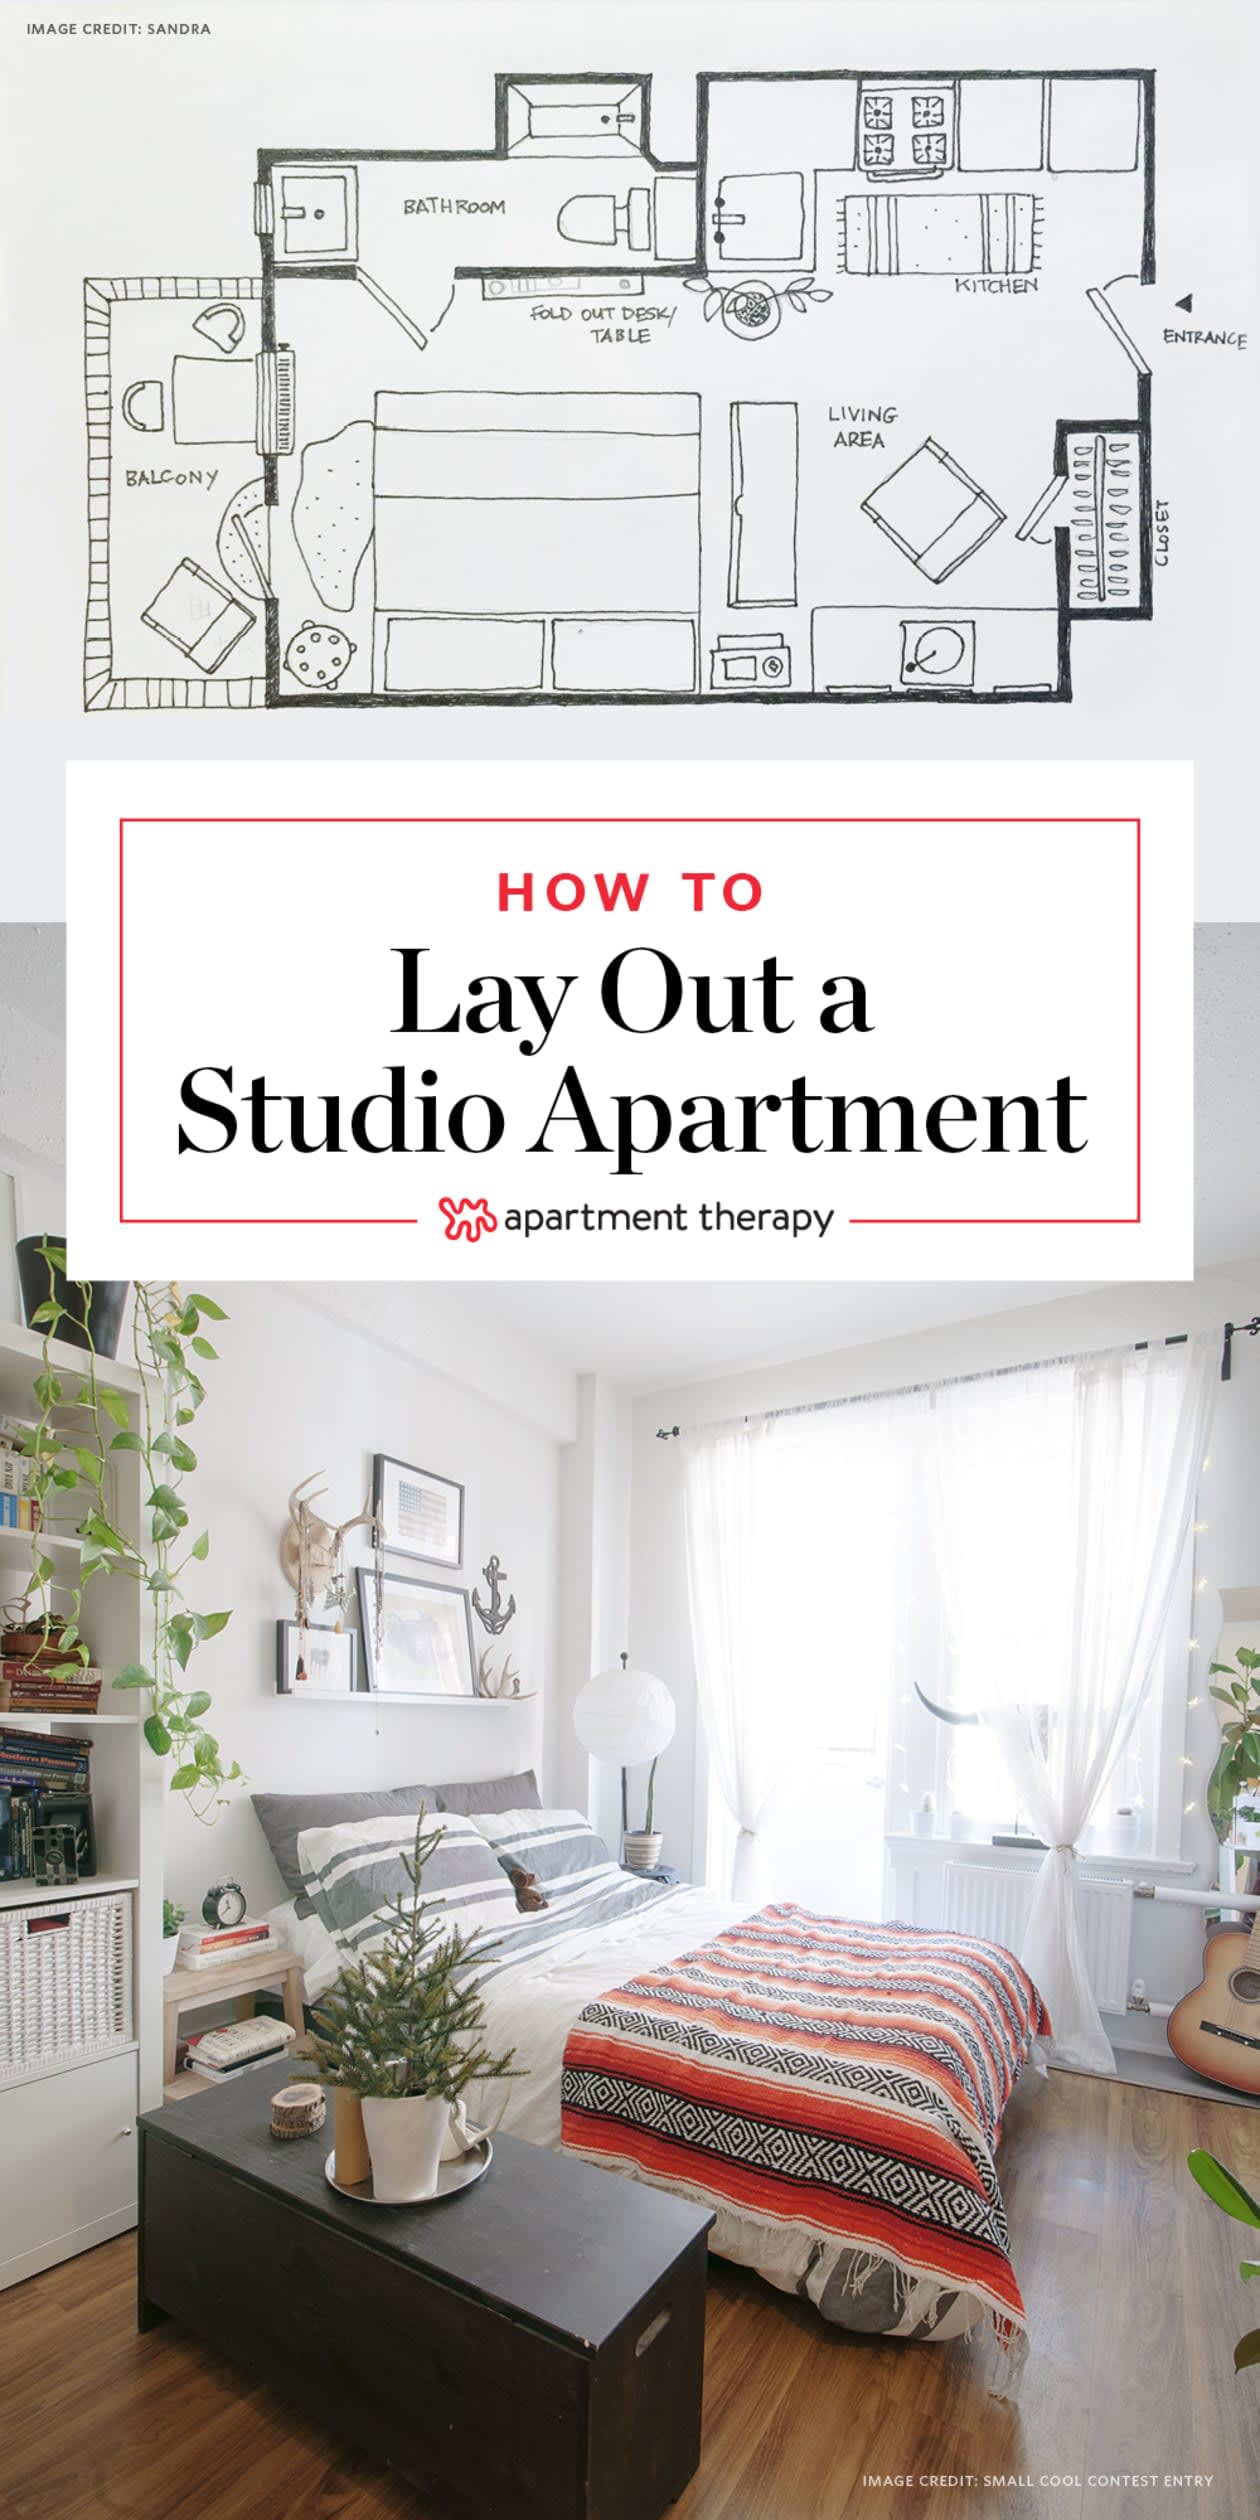 5 Ways To Lay Out A Studio Apartment Apartment Therapy,How Long Should My Curtains Be For 8 Foot Ceilings